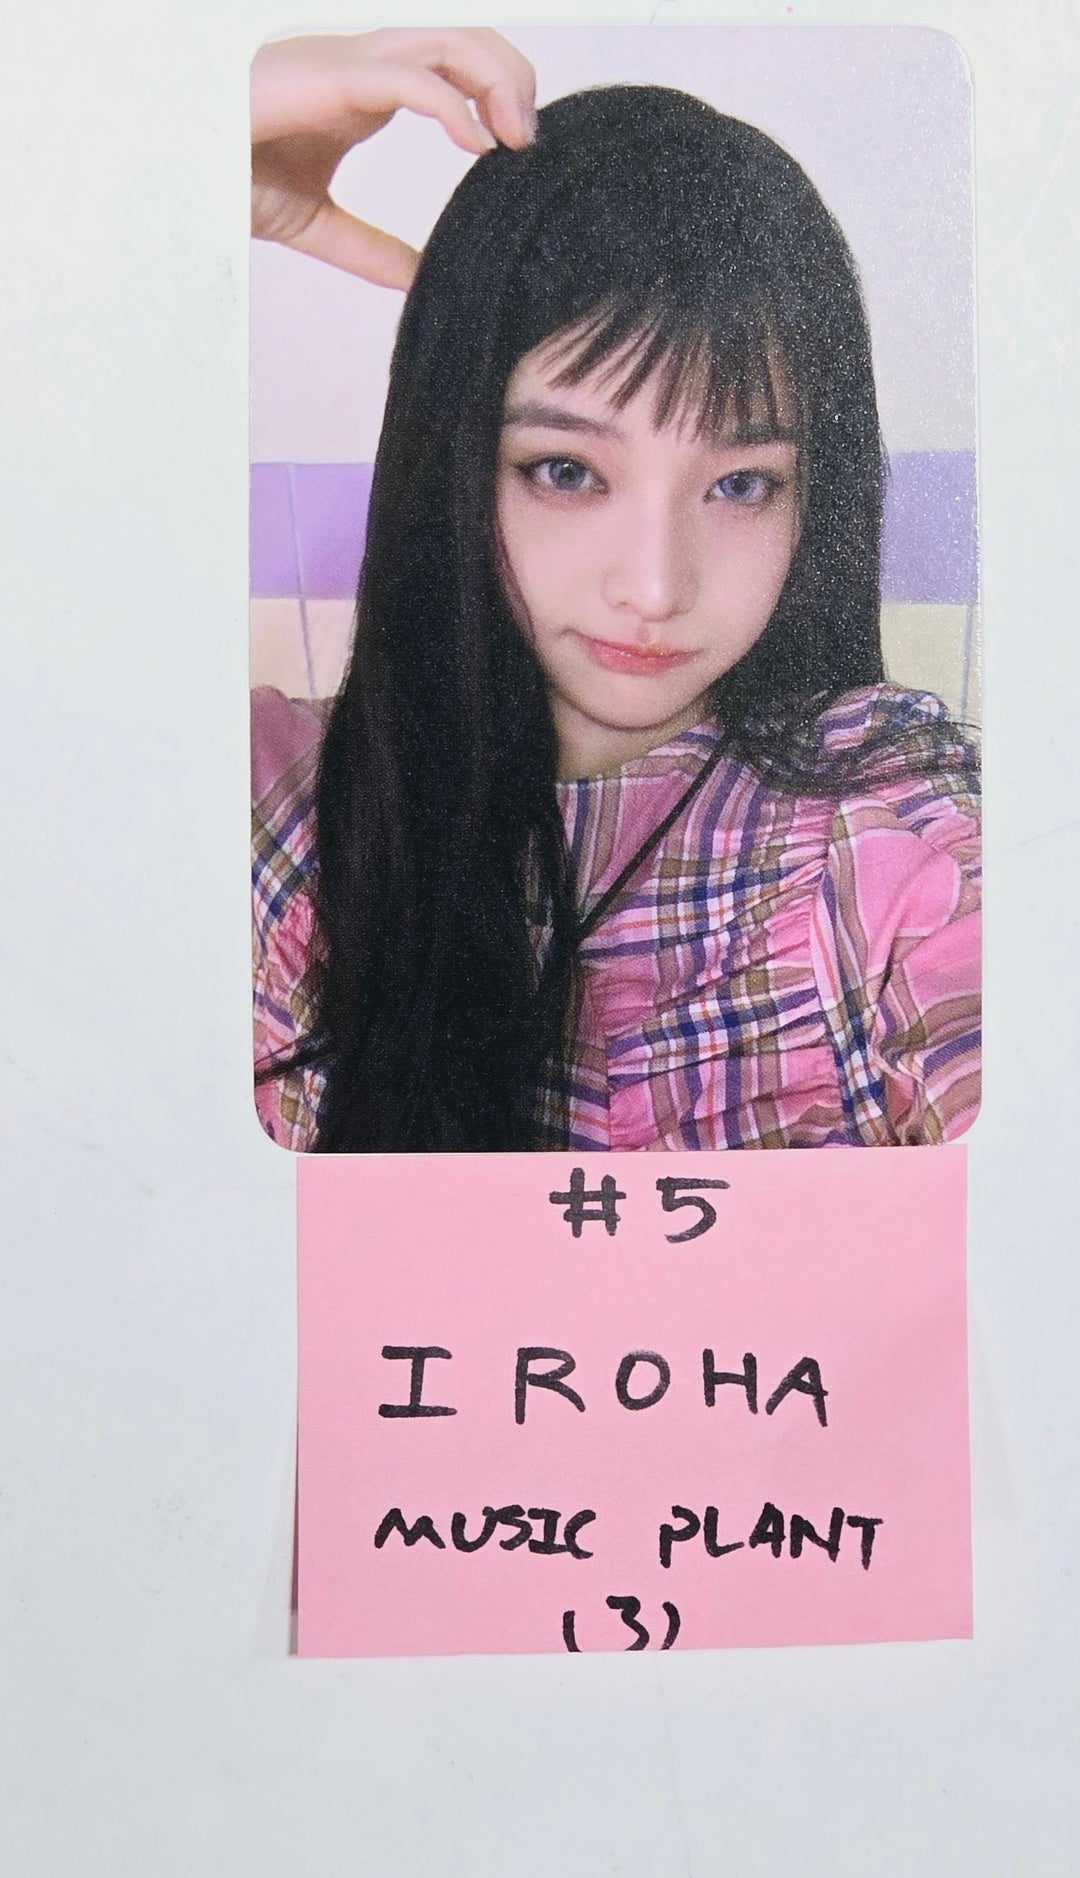 ILLIT "SUPER REAL ME" - Music Plant Fansign Event Photocard [Weverse Album Ver.] [24.4.23]